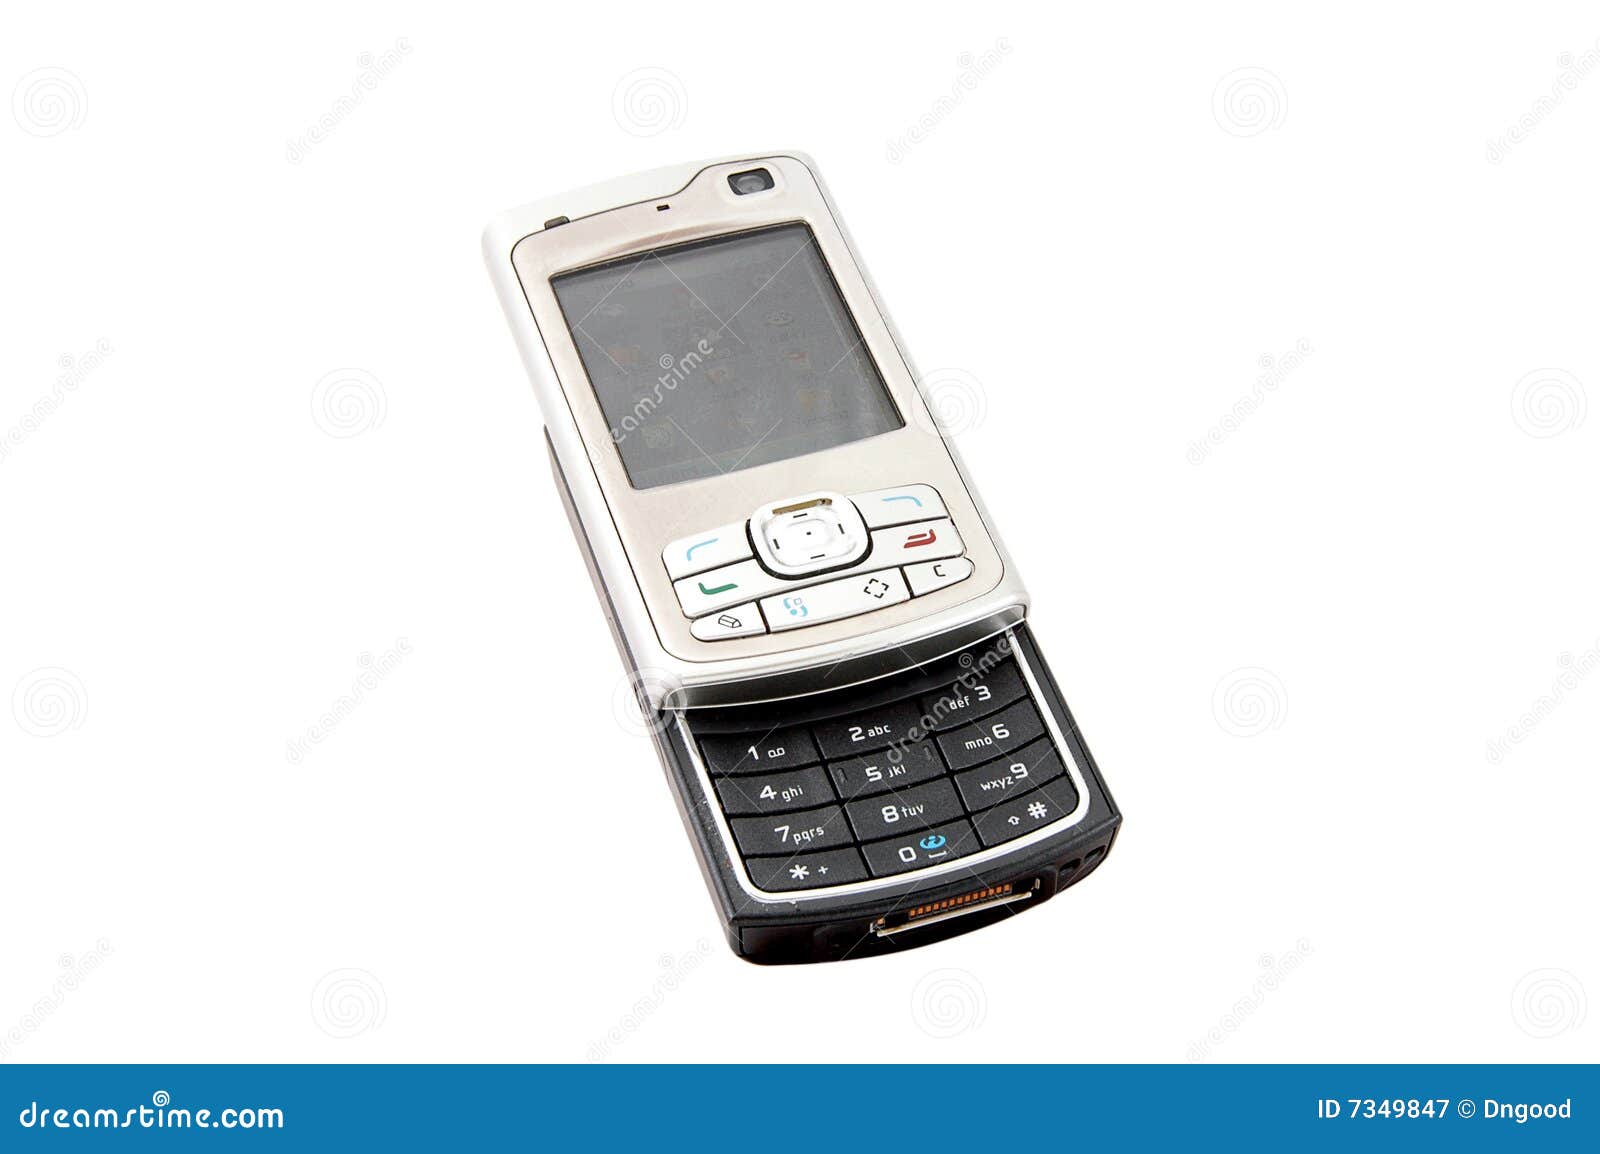 An isolated to white image of an old and used mobile phone.